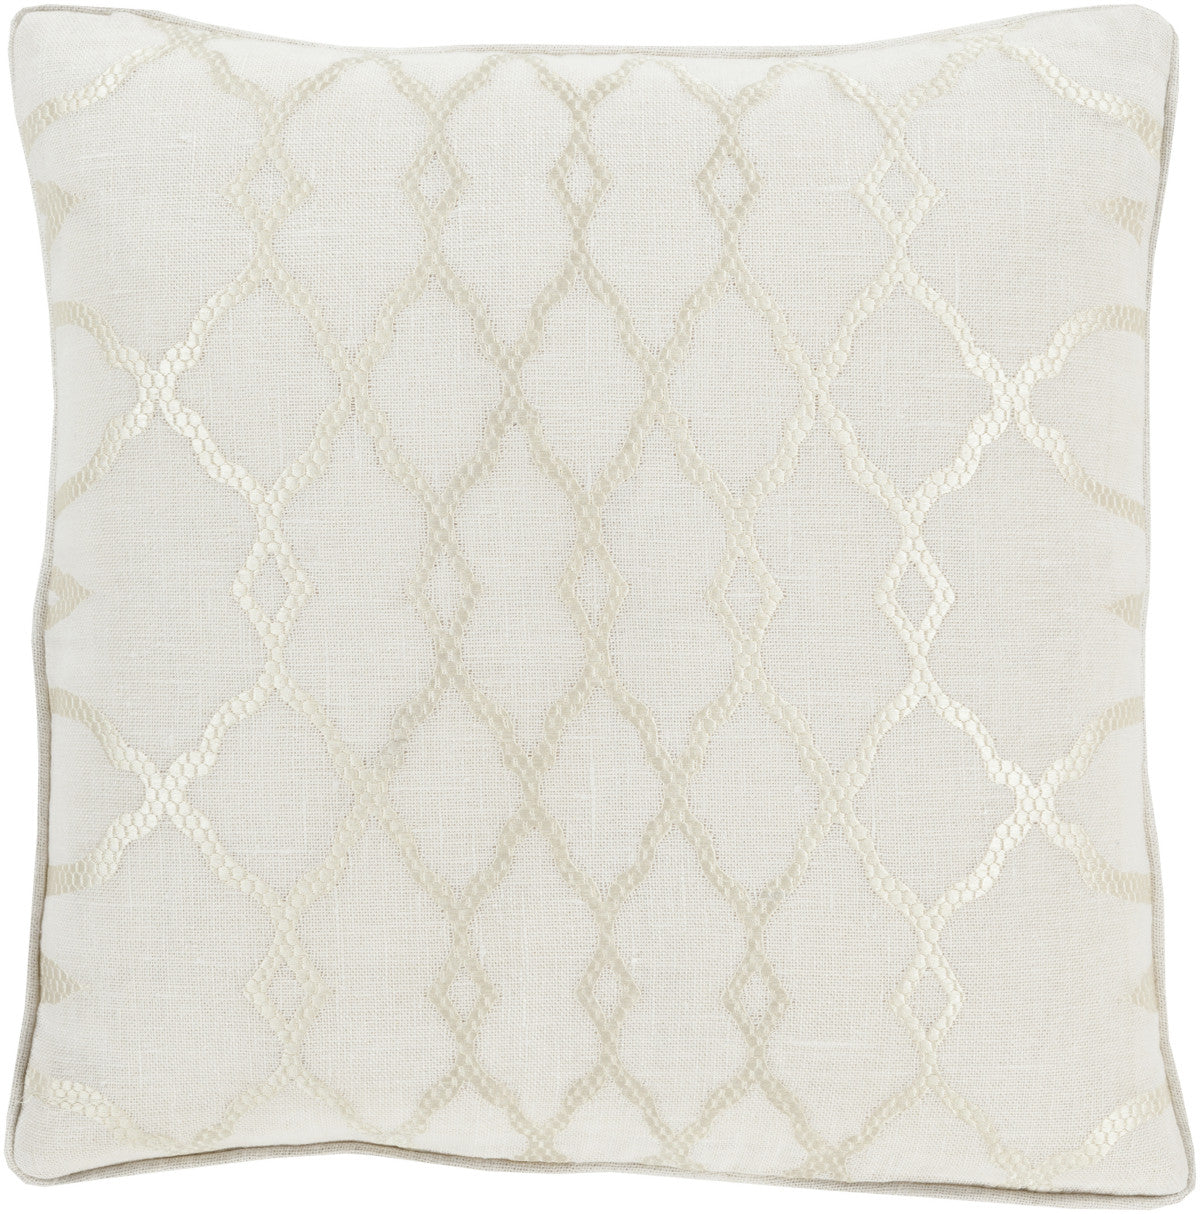 Surya Lydia Luxury in Linen LY-001 Pillow